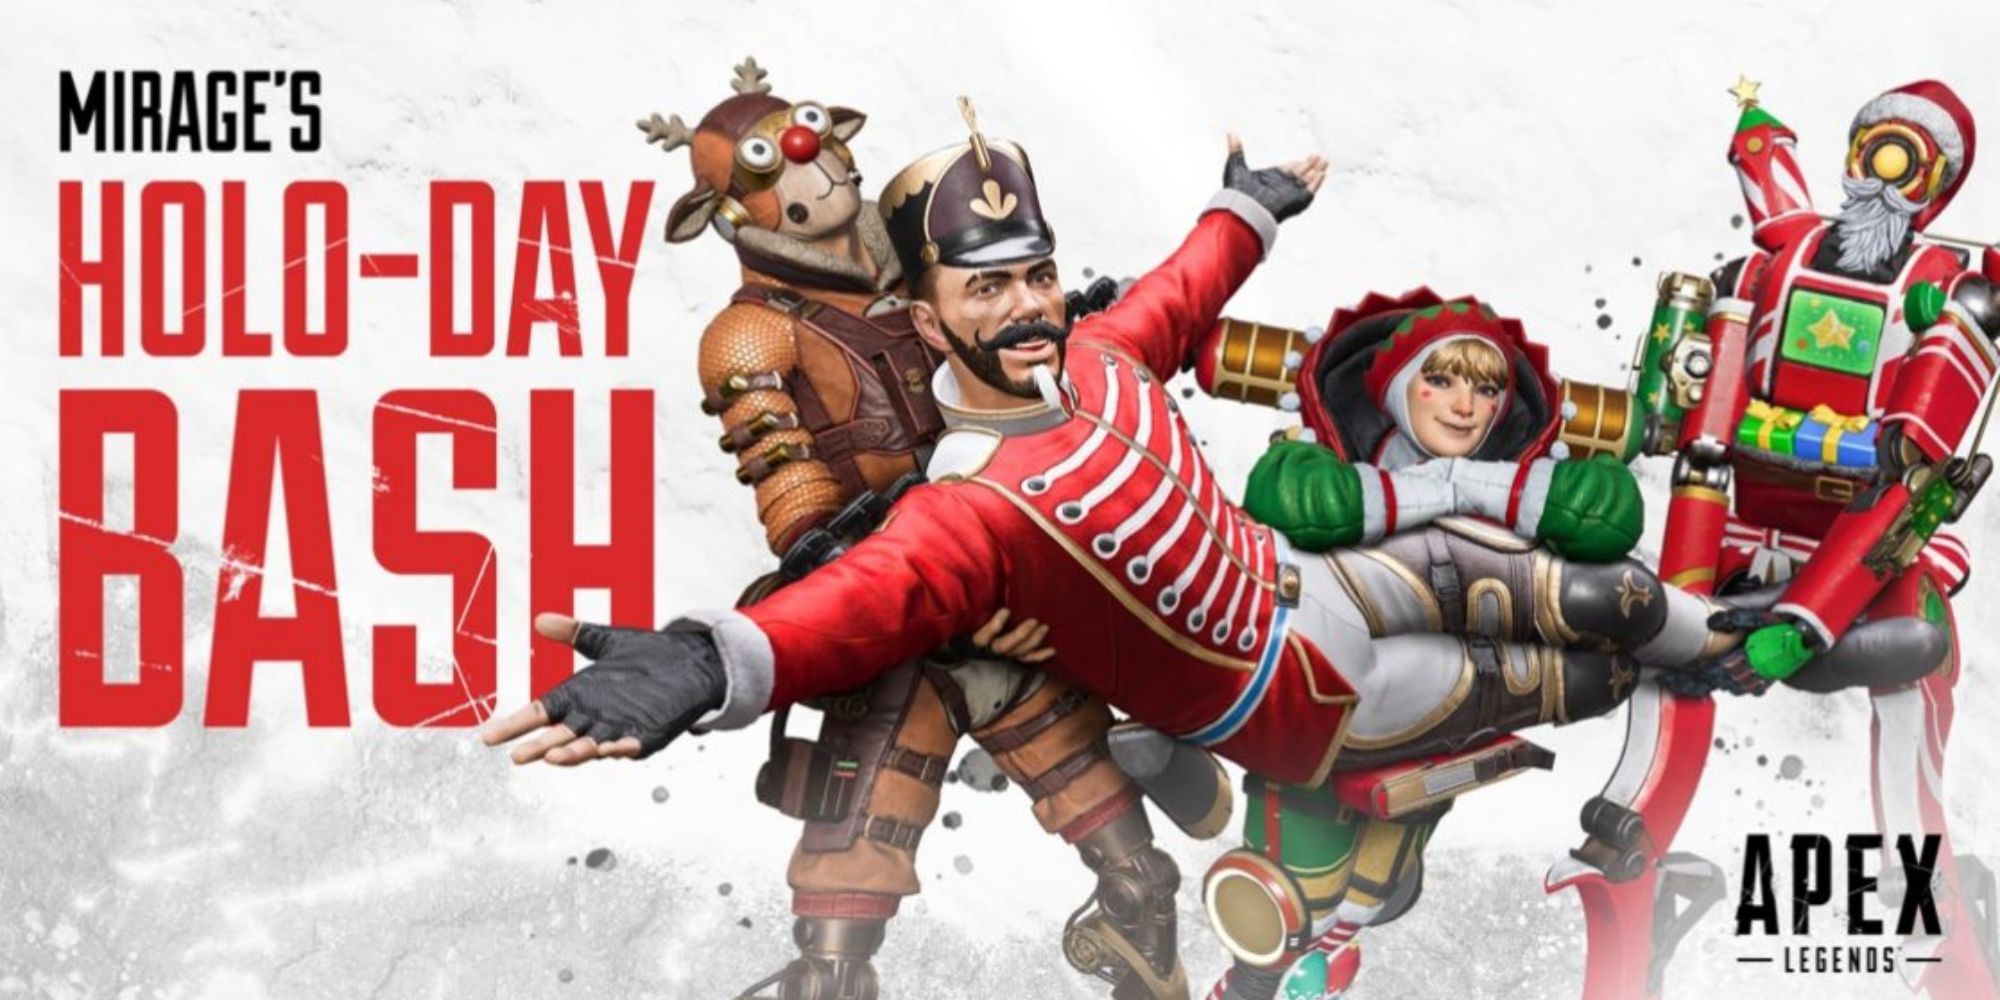 Apex Legends - Holo-Day Bash Christmas Event - Legends Holding Mirage